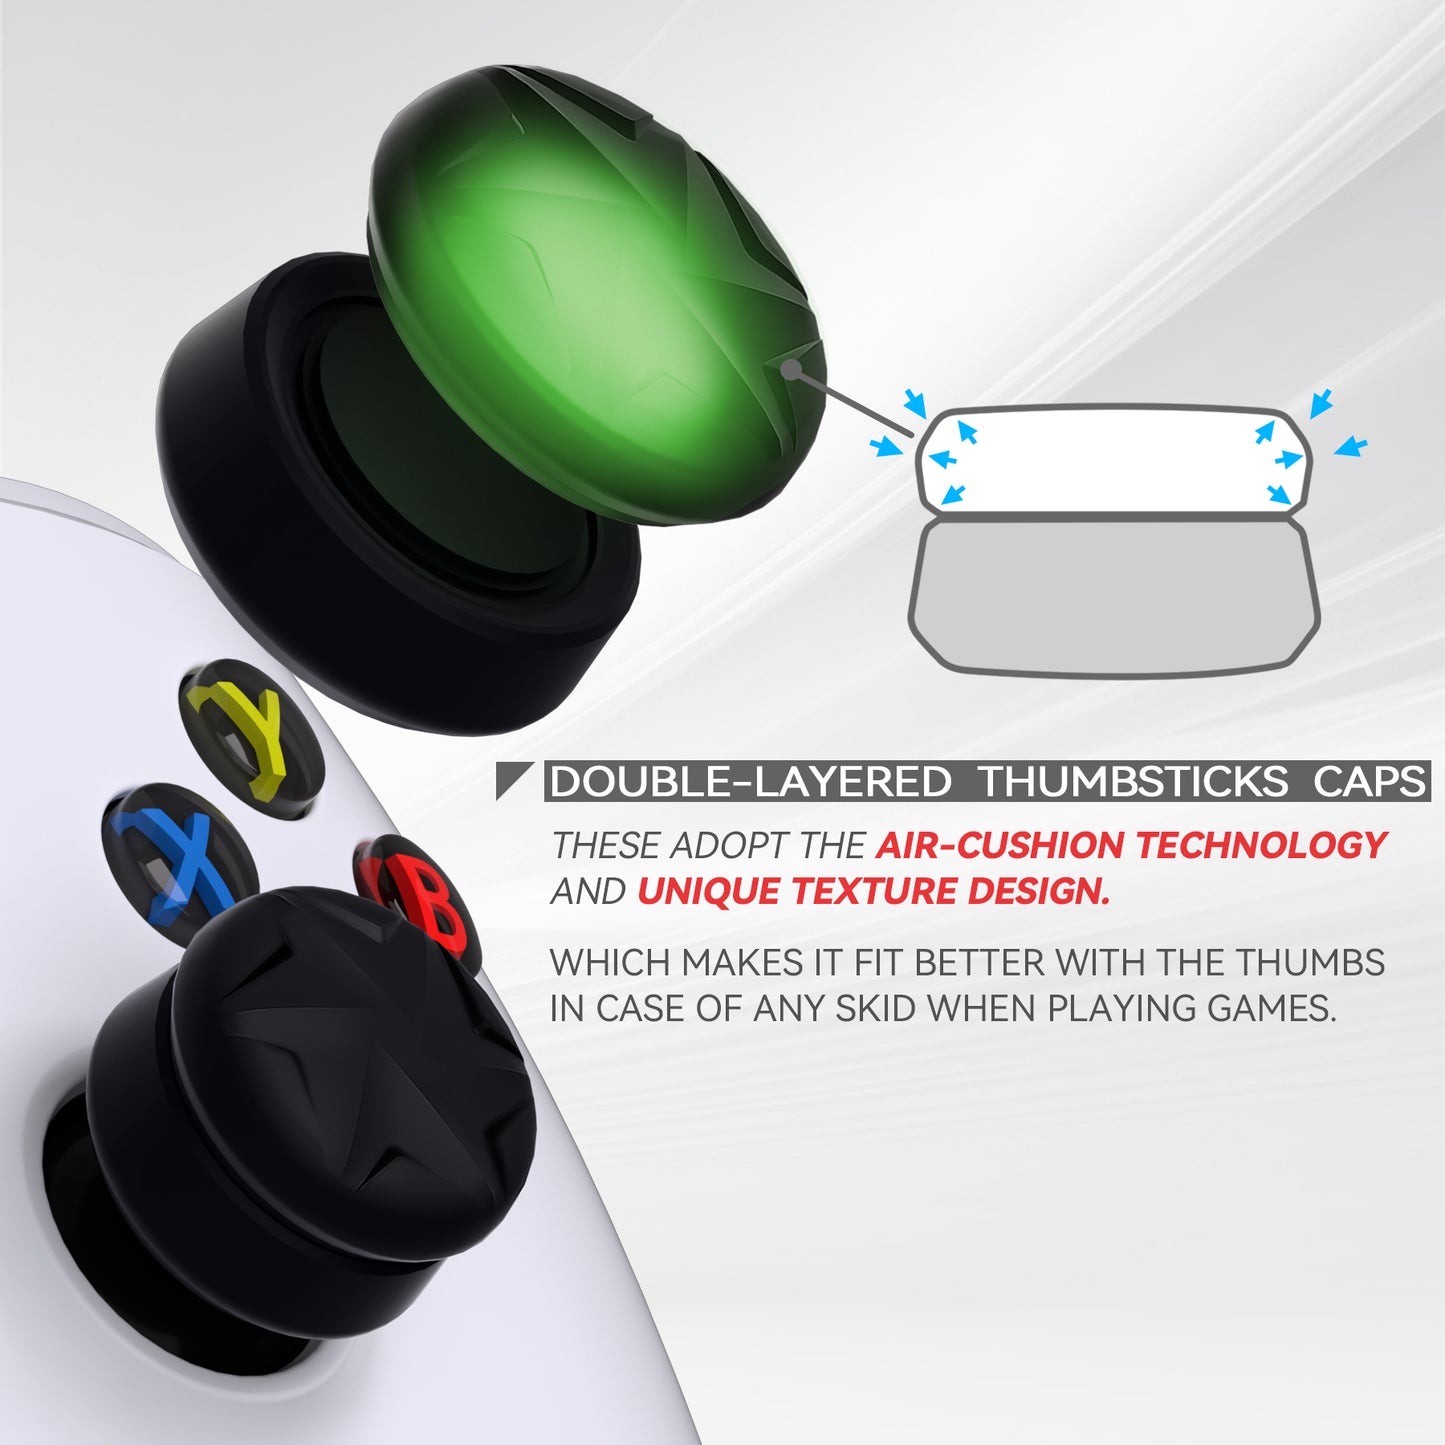 PlayVital 3 Height Razor Thumbs Cushion Caps Thumb Grips for ps5, for ps4, Thumbstick Grip Cover for Xbox Core Wireless Controller, Thumb Grip Caps for Xbox One, Elite Series 2, for Switch Pro - Black - PJM3057 PlayVital